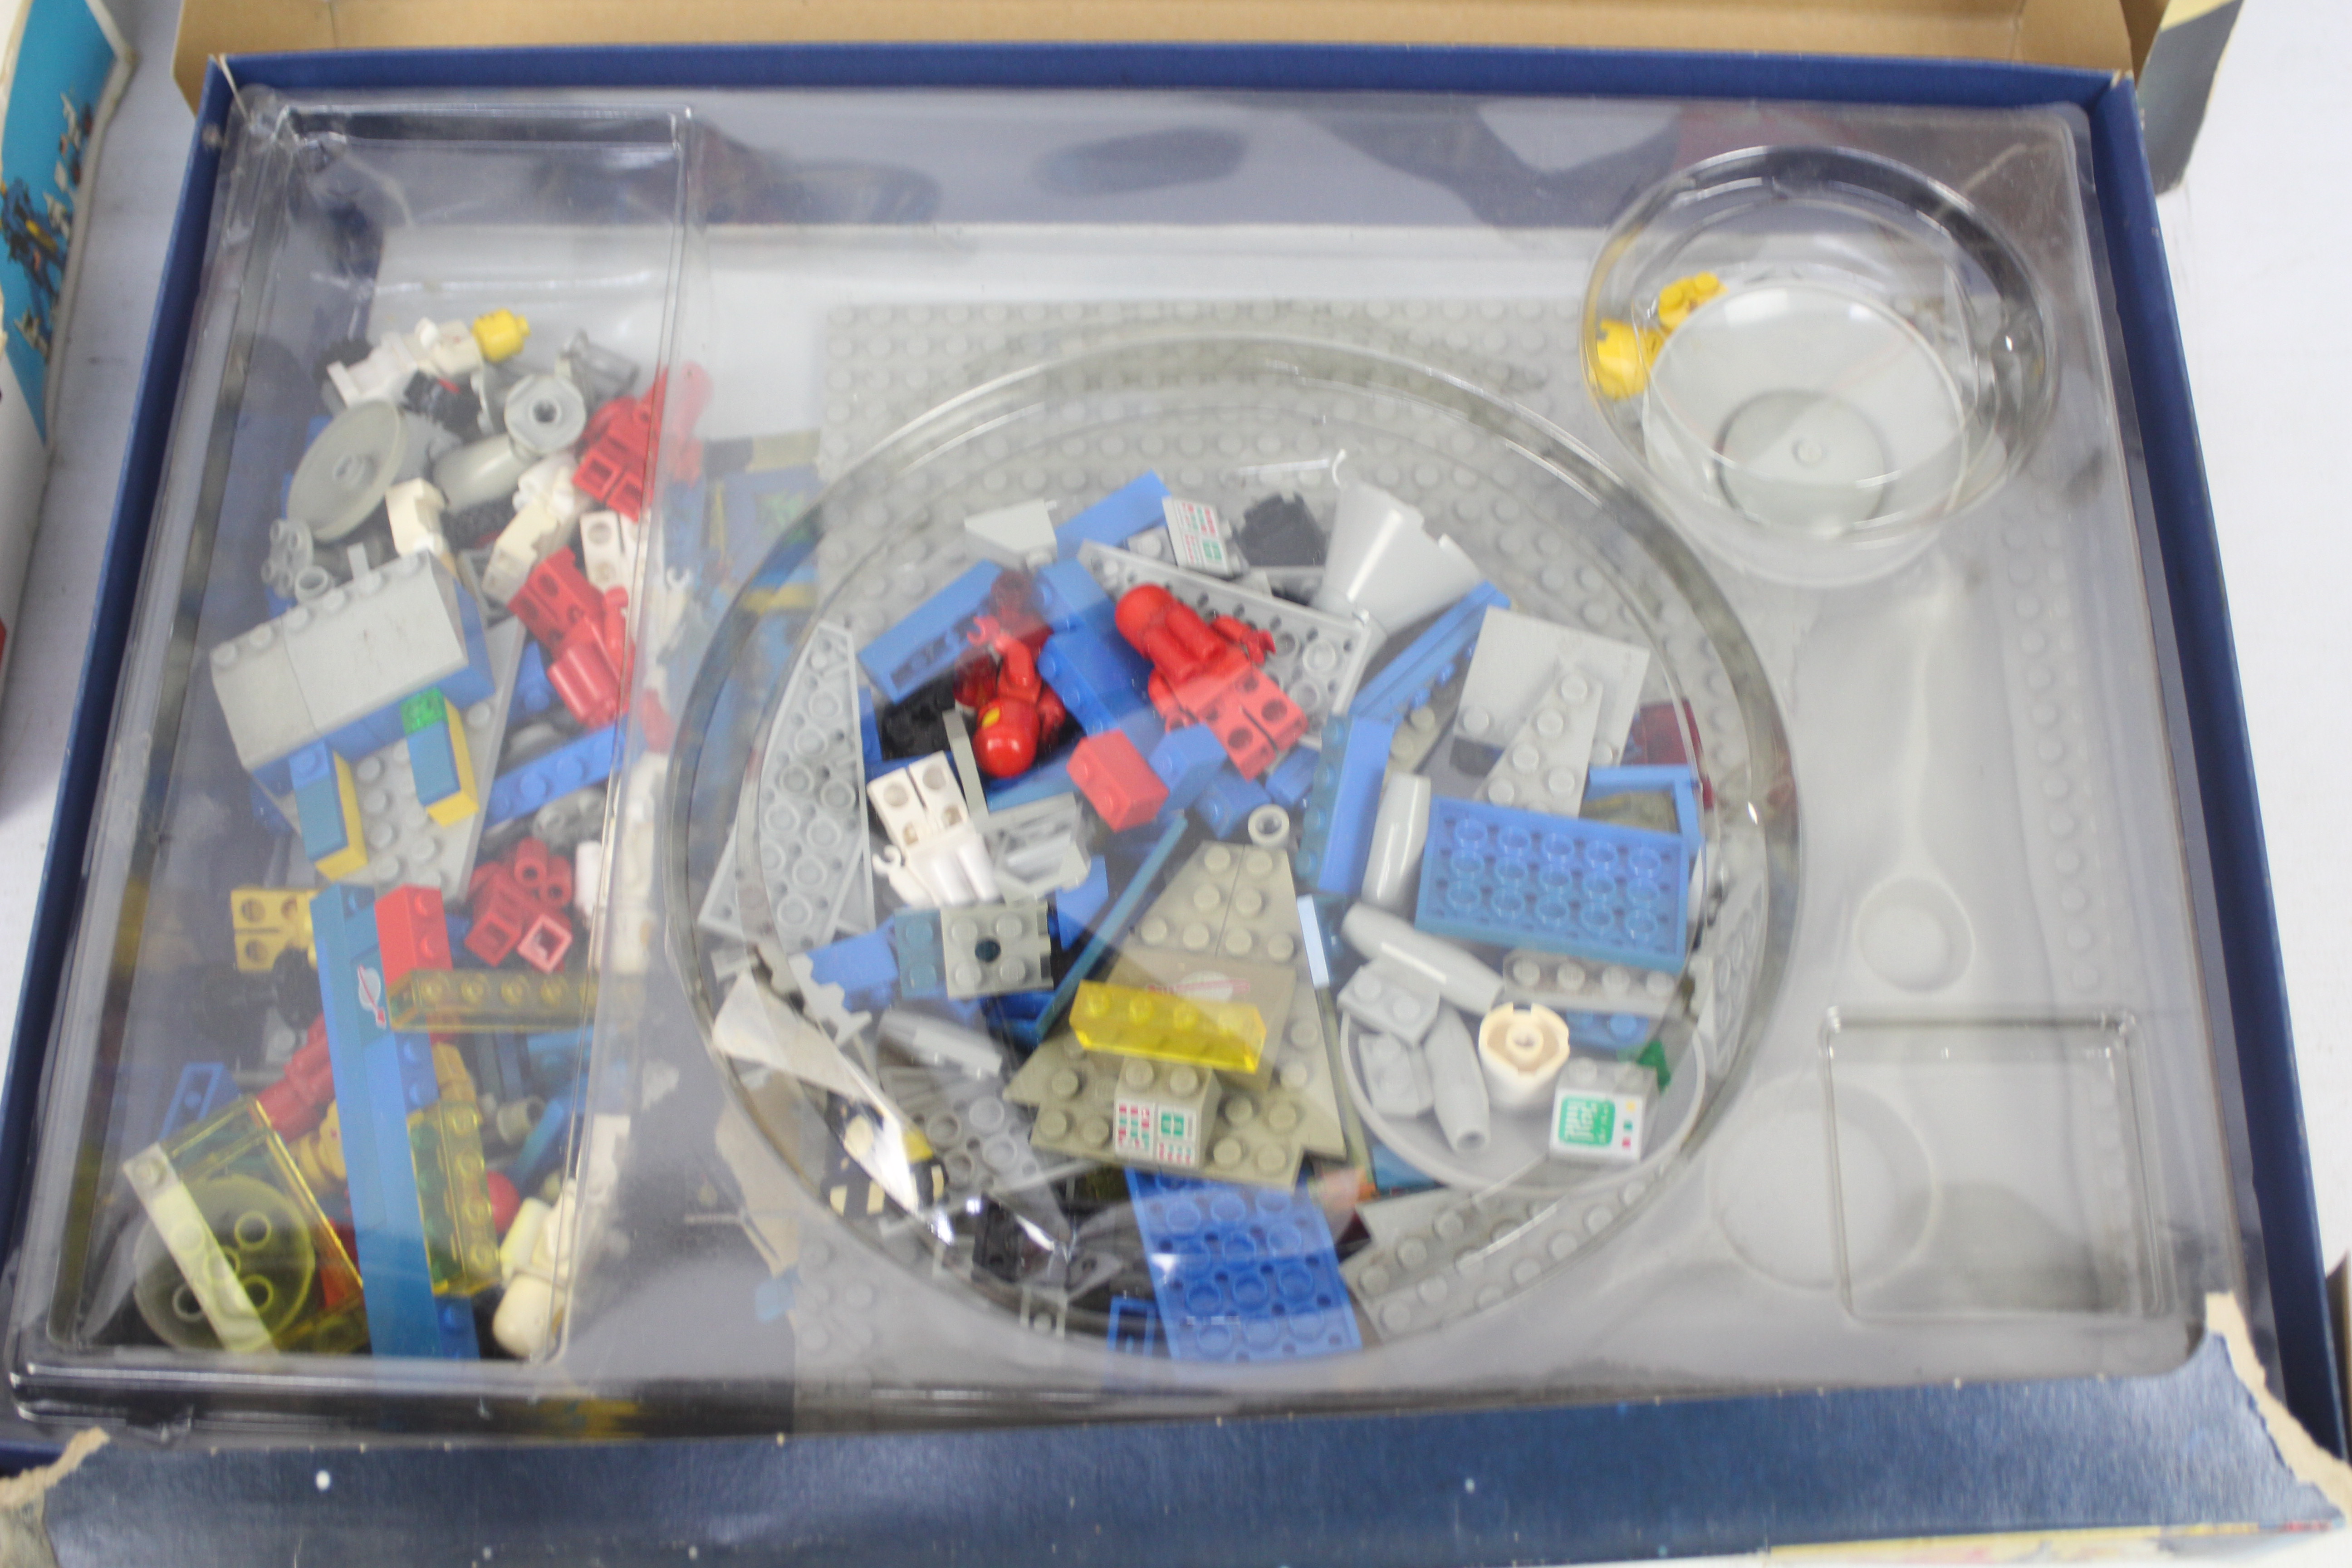 Lego - 3 x vintage Lego boxed sets, Moon Landing set dated 1975, Space Centre dated 1981, - Image 9 of 9